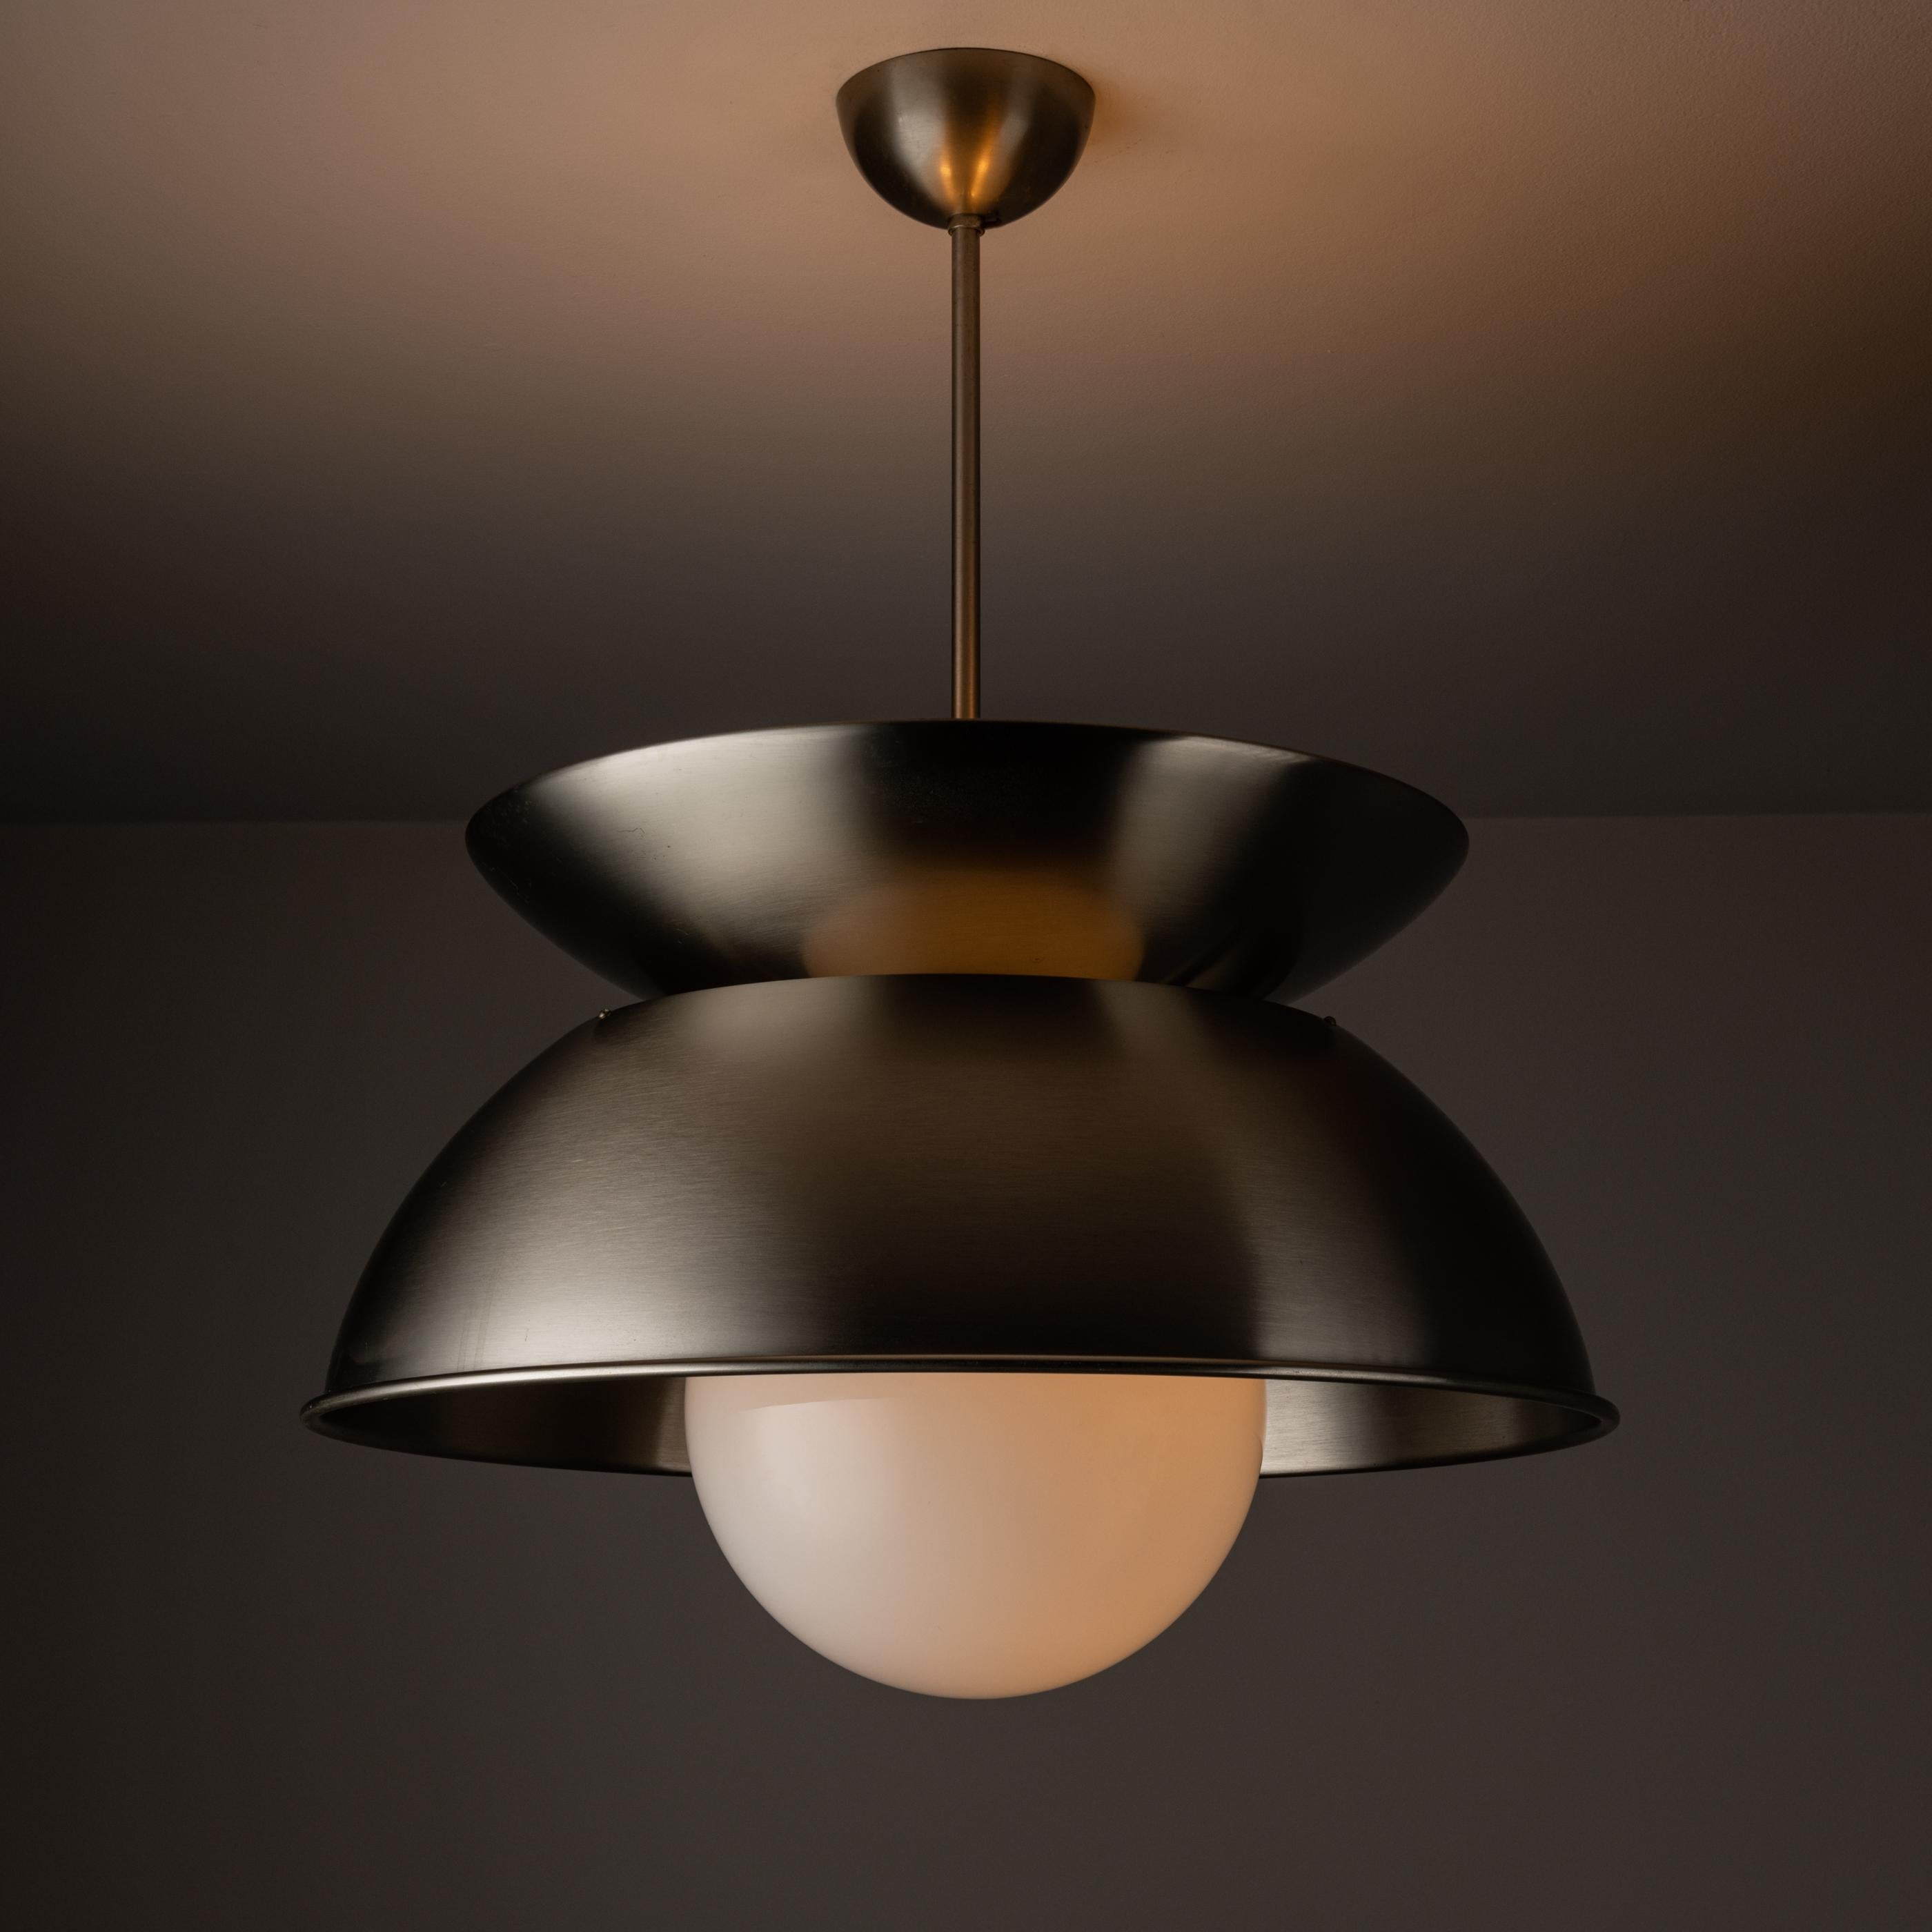 Mid-20th Century Cetra Ceiling Light by Vico Magistretti for Artemide For Sale